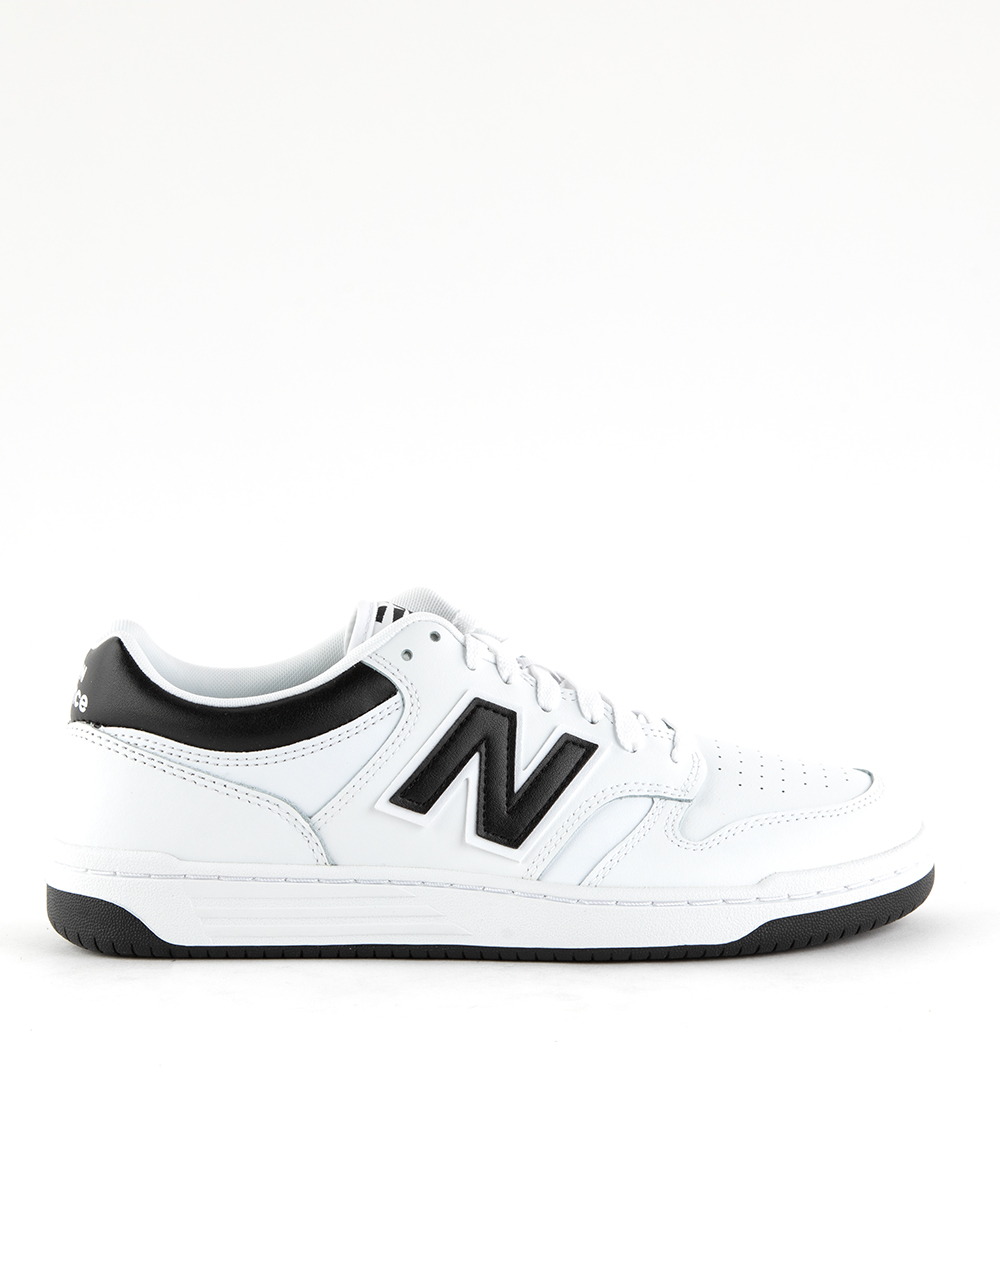 NEW BALANCE 480 Mens Shoes - WHITE FLASH | Tillys